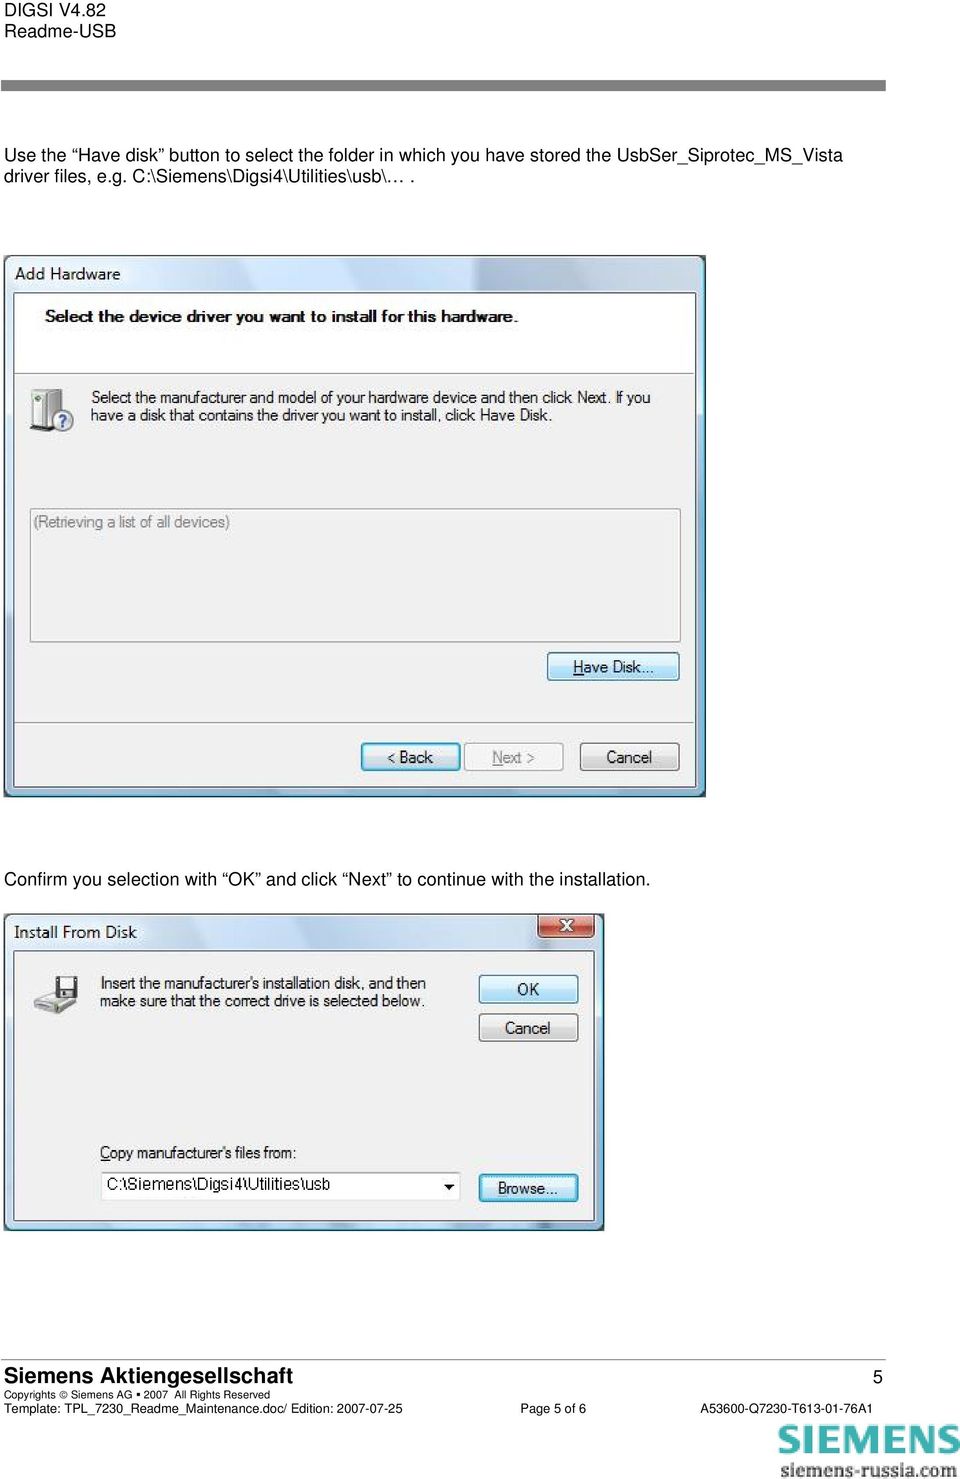 Confirm you selection with OK and click Next to continue with the installation.